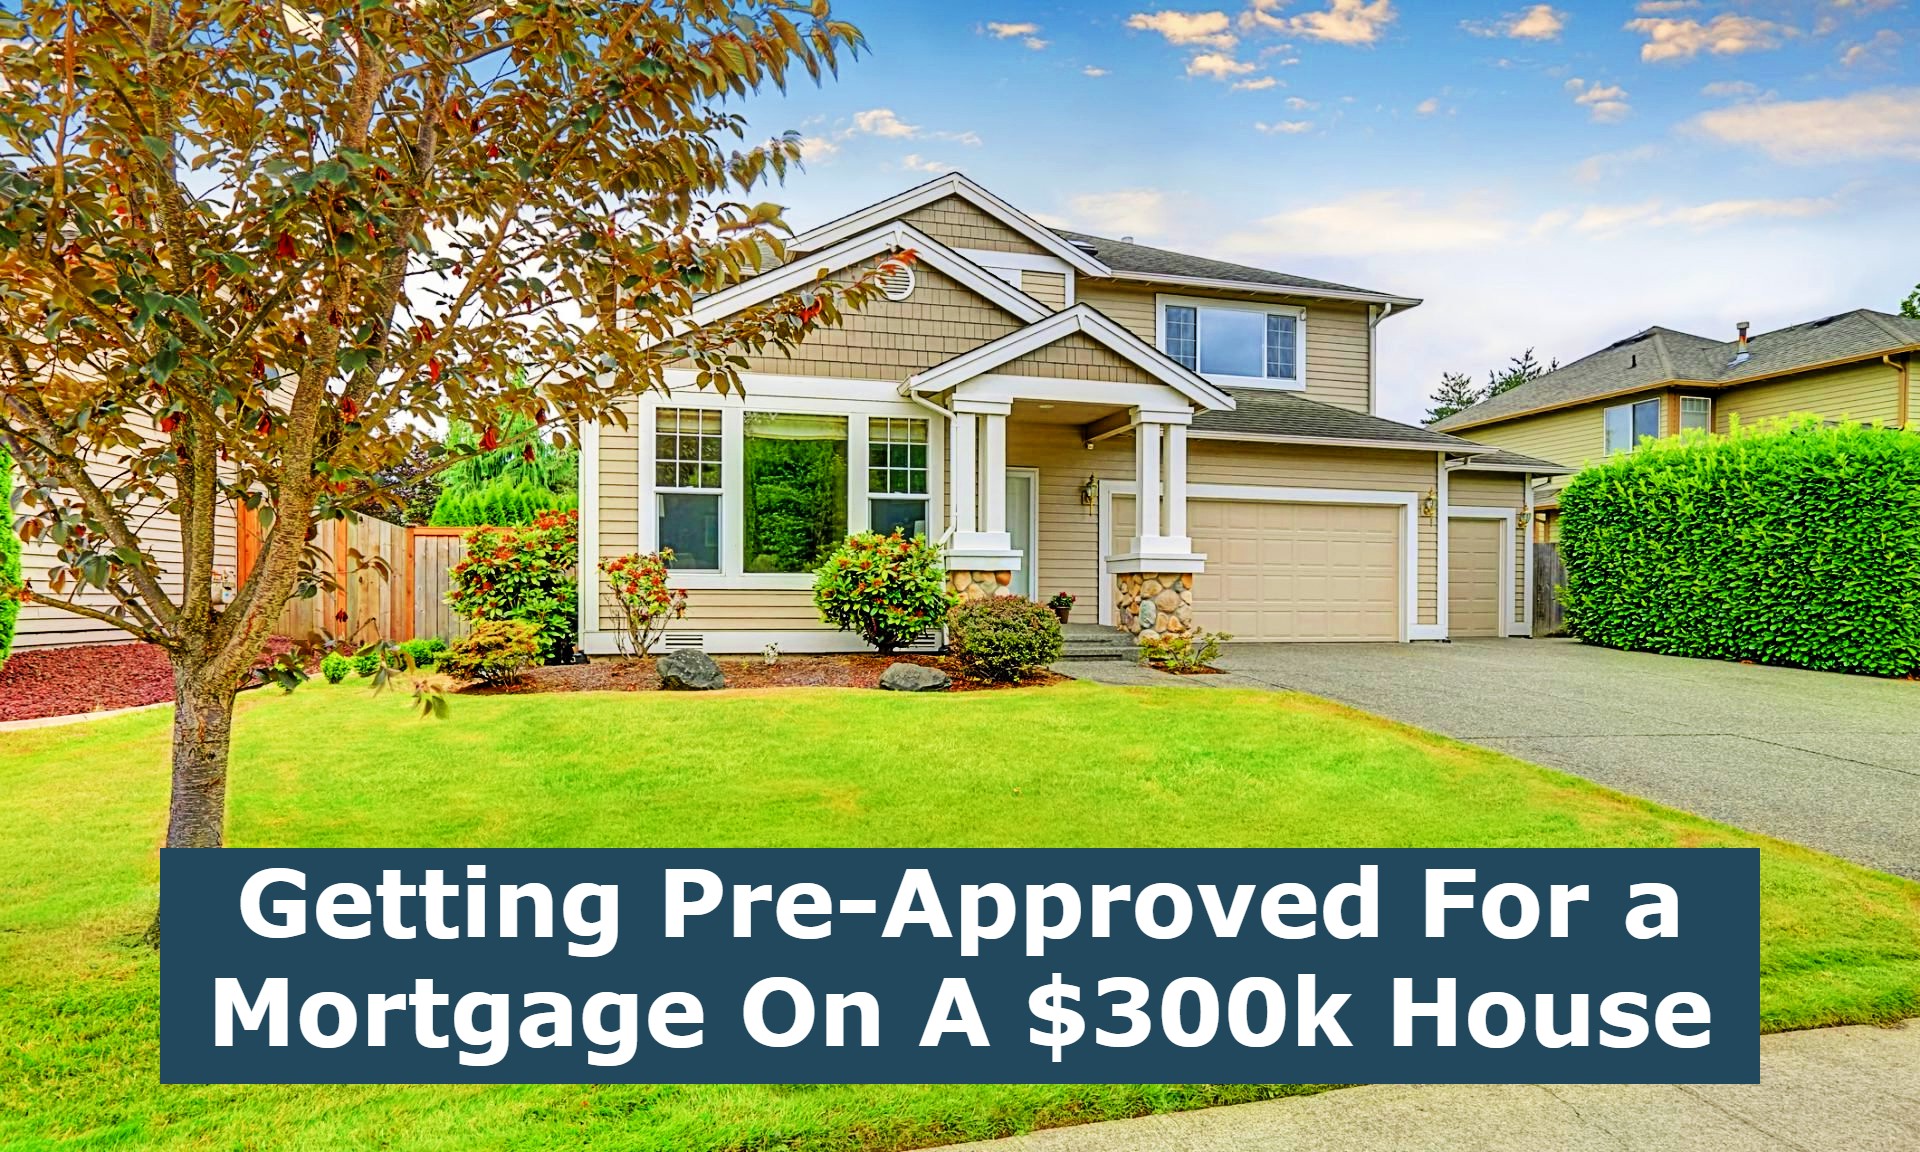 Getting Pre-Approved For a Mortgage On A $300k House